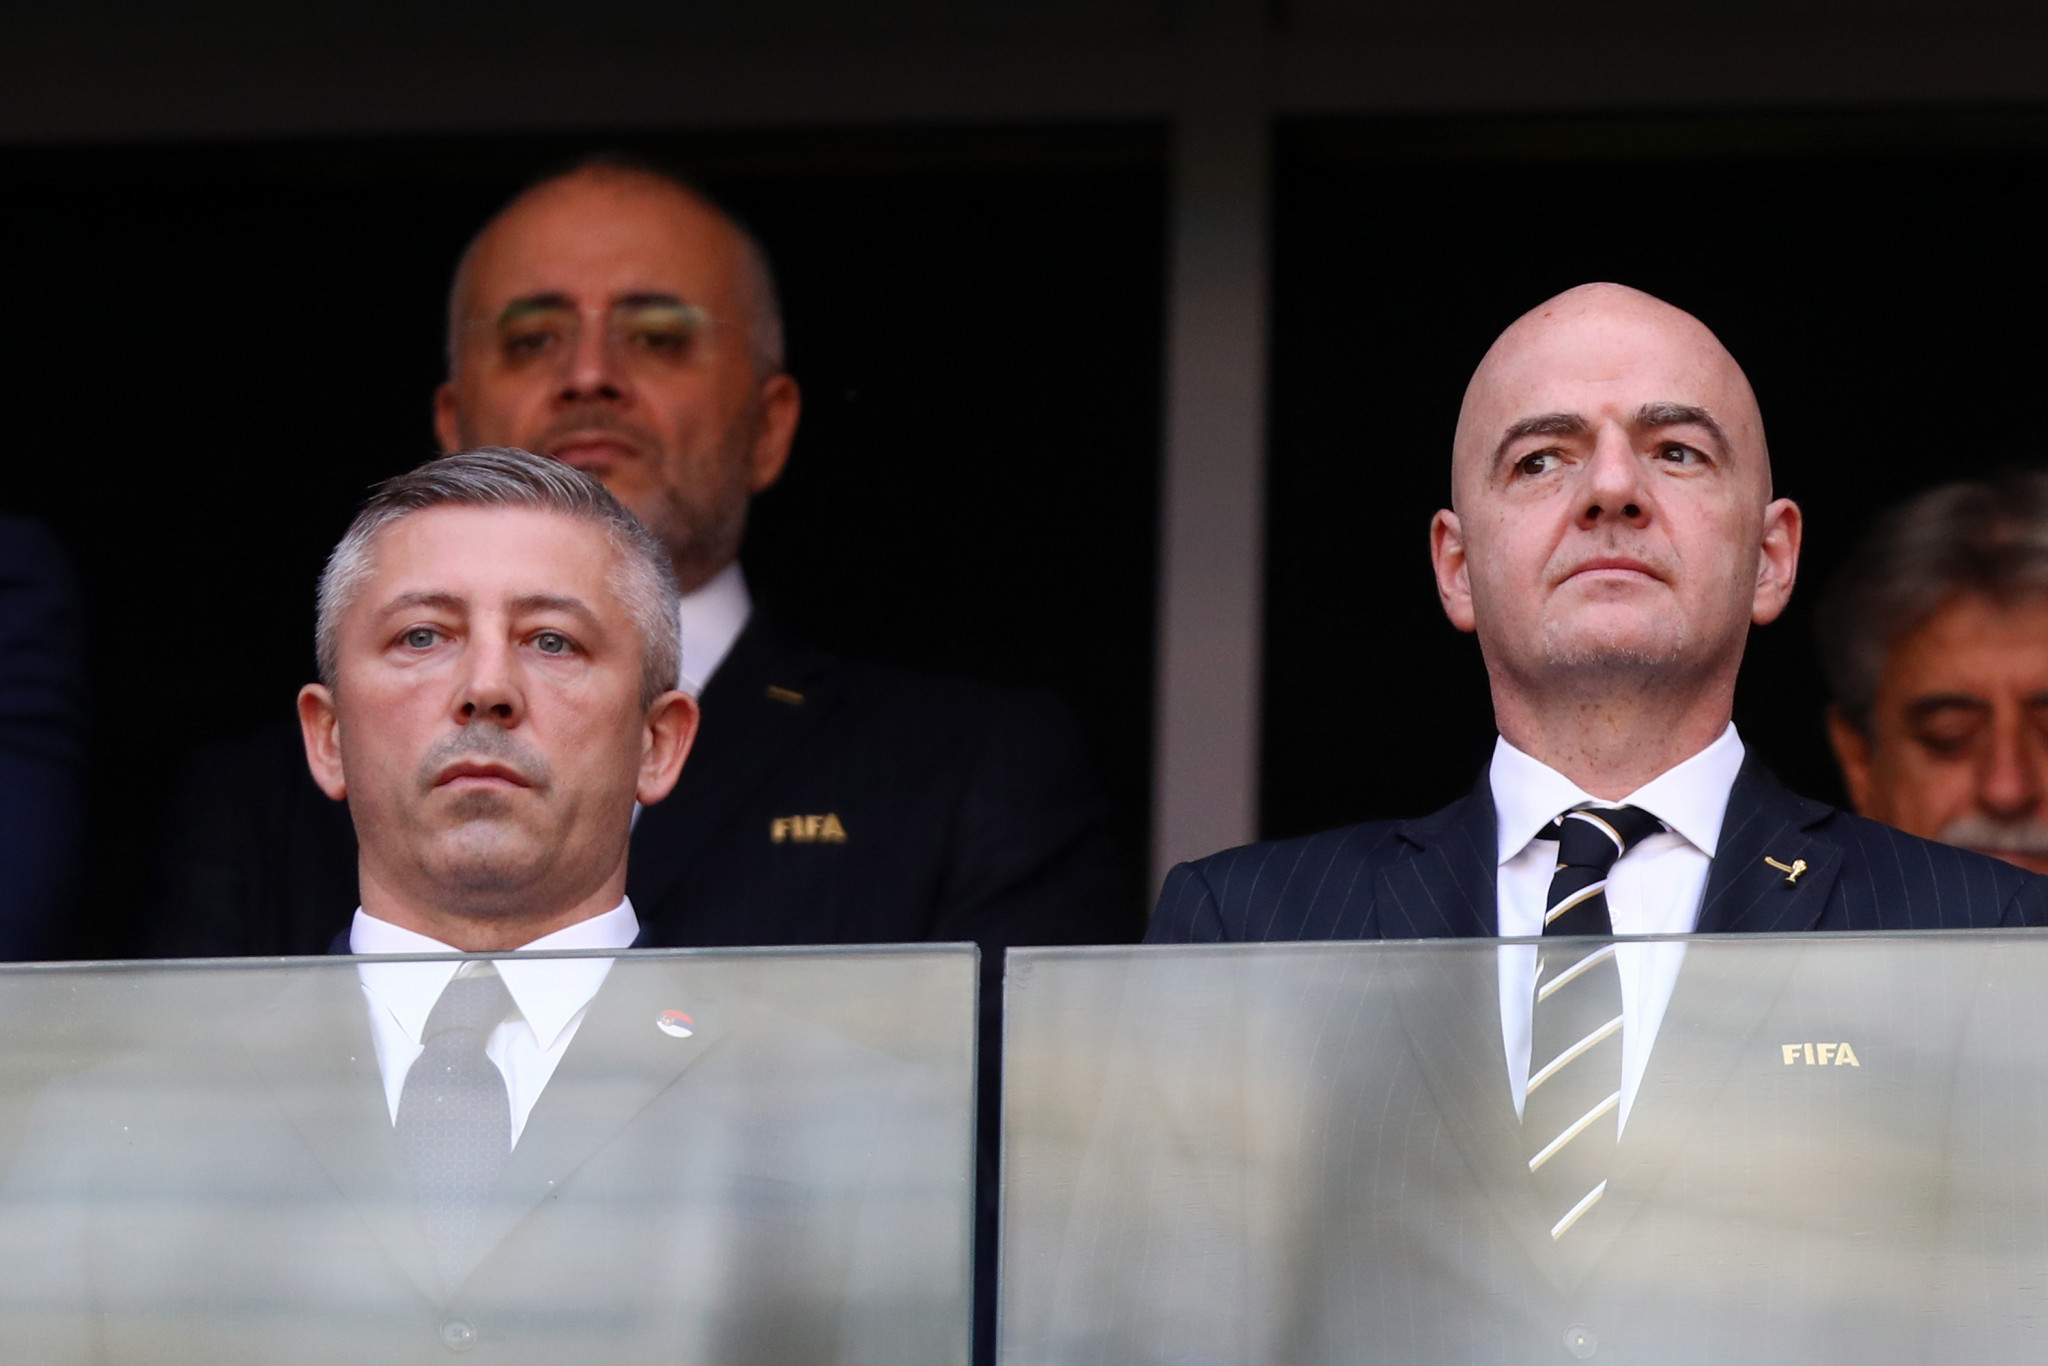 Serbian Football Association head in hot water with FIFA after claiming bias against country